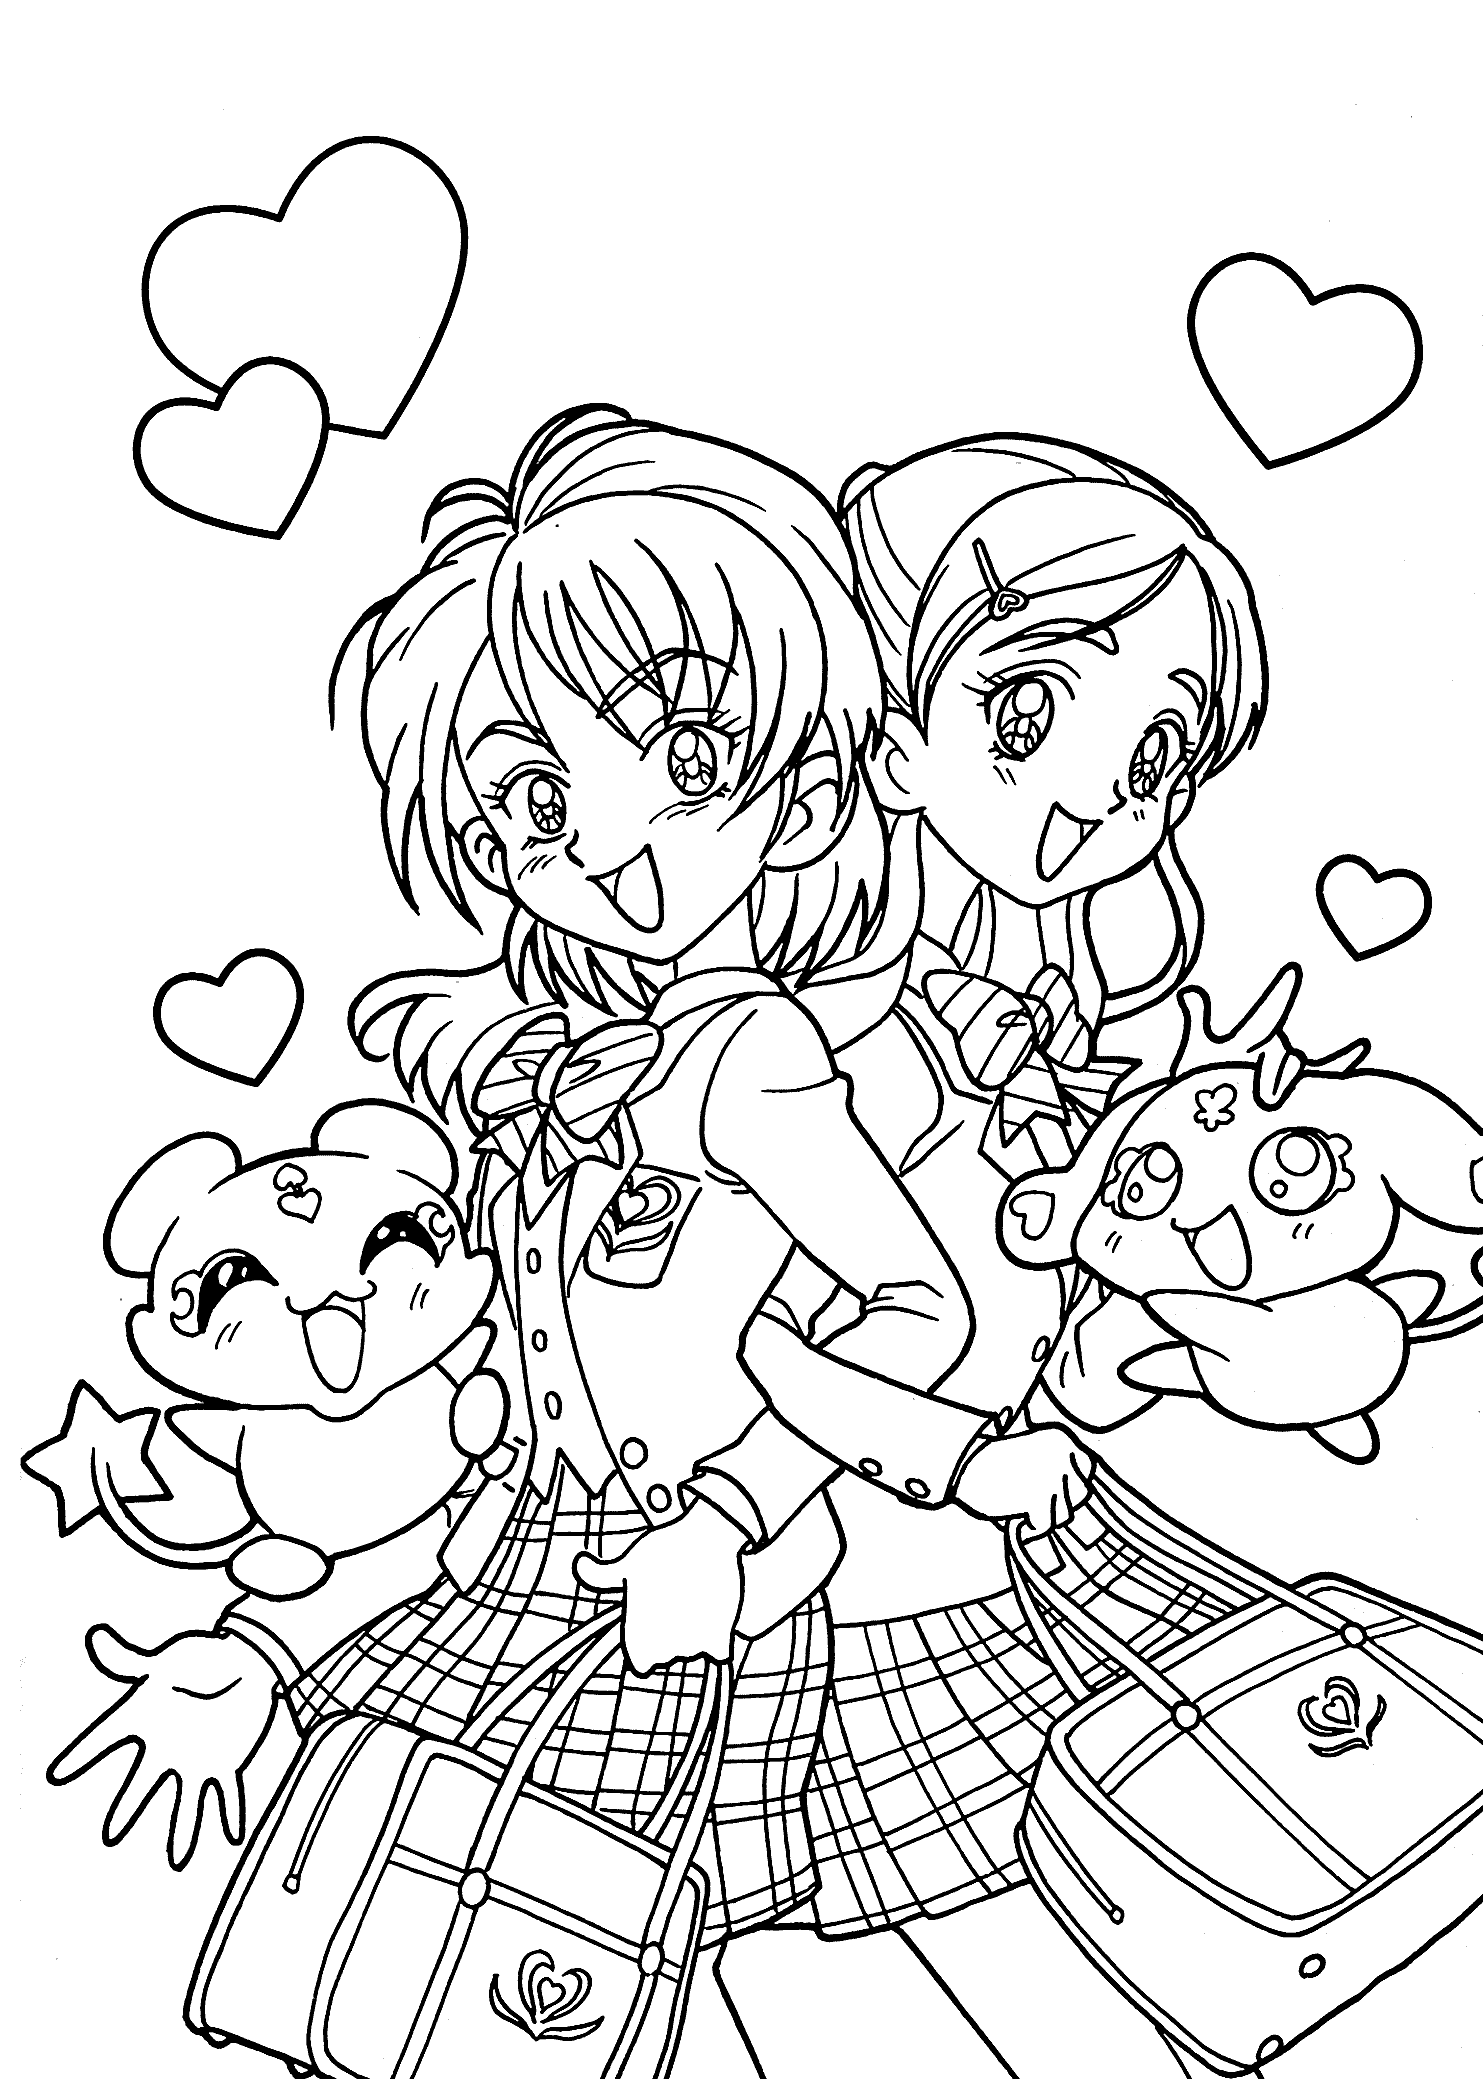 manga coloring pages school girl Coloring4free